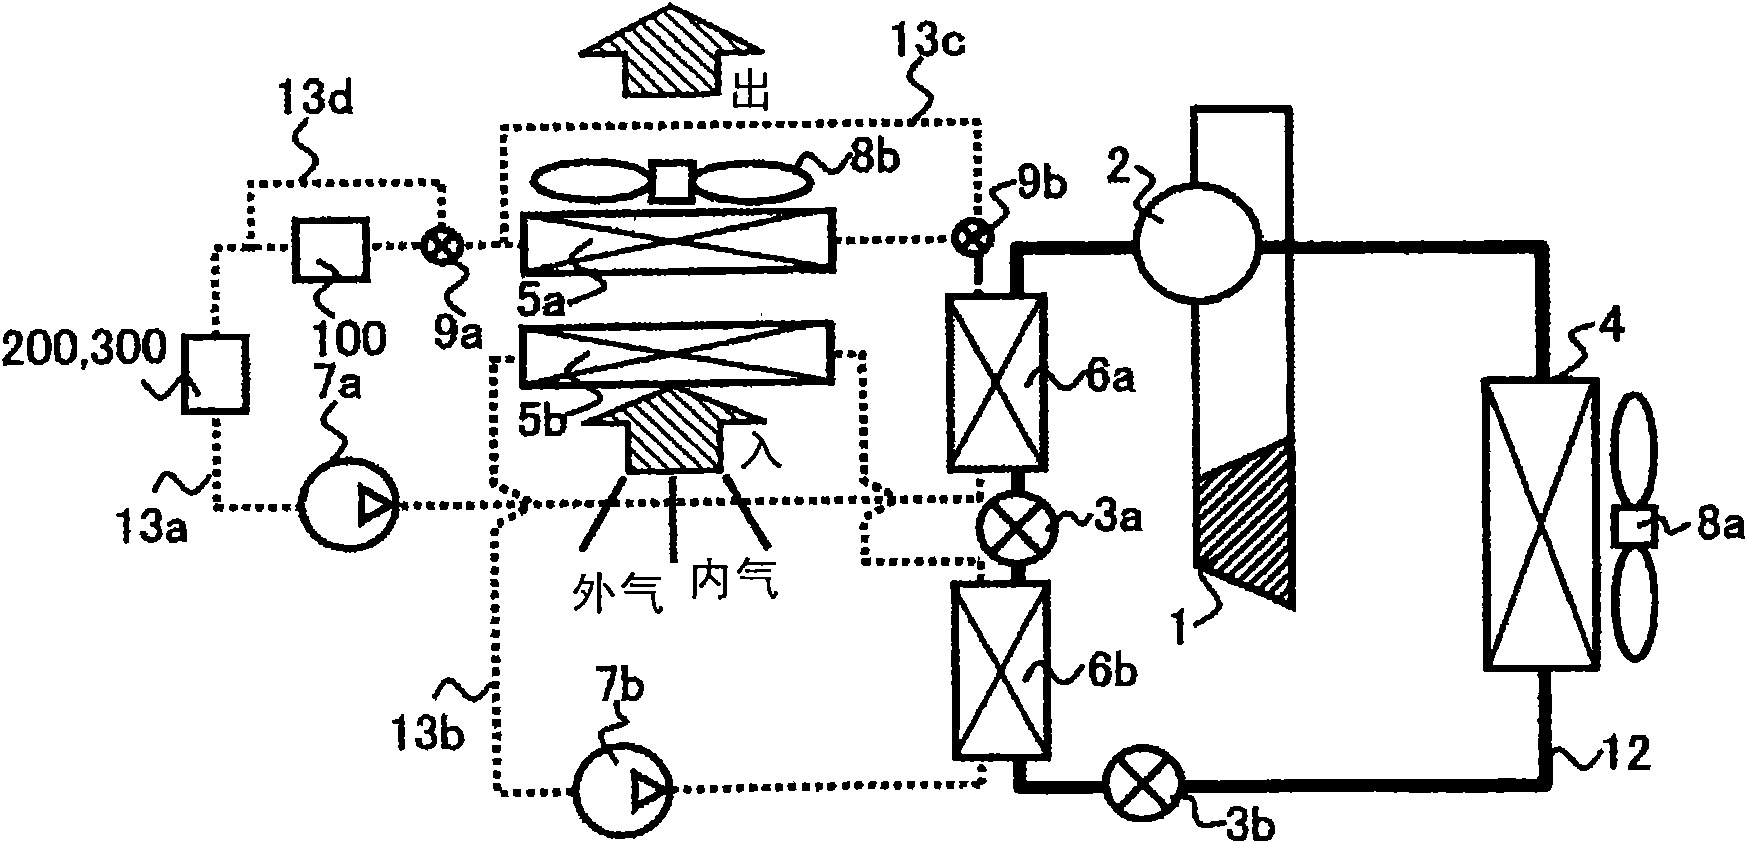 Thermodynamic cycle system for a vehicle